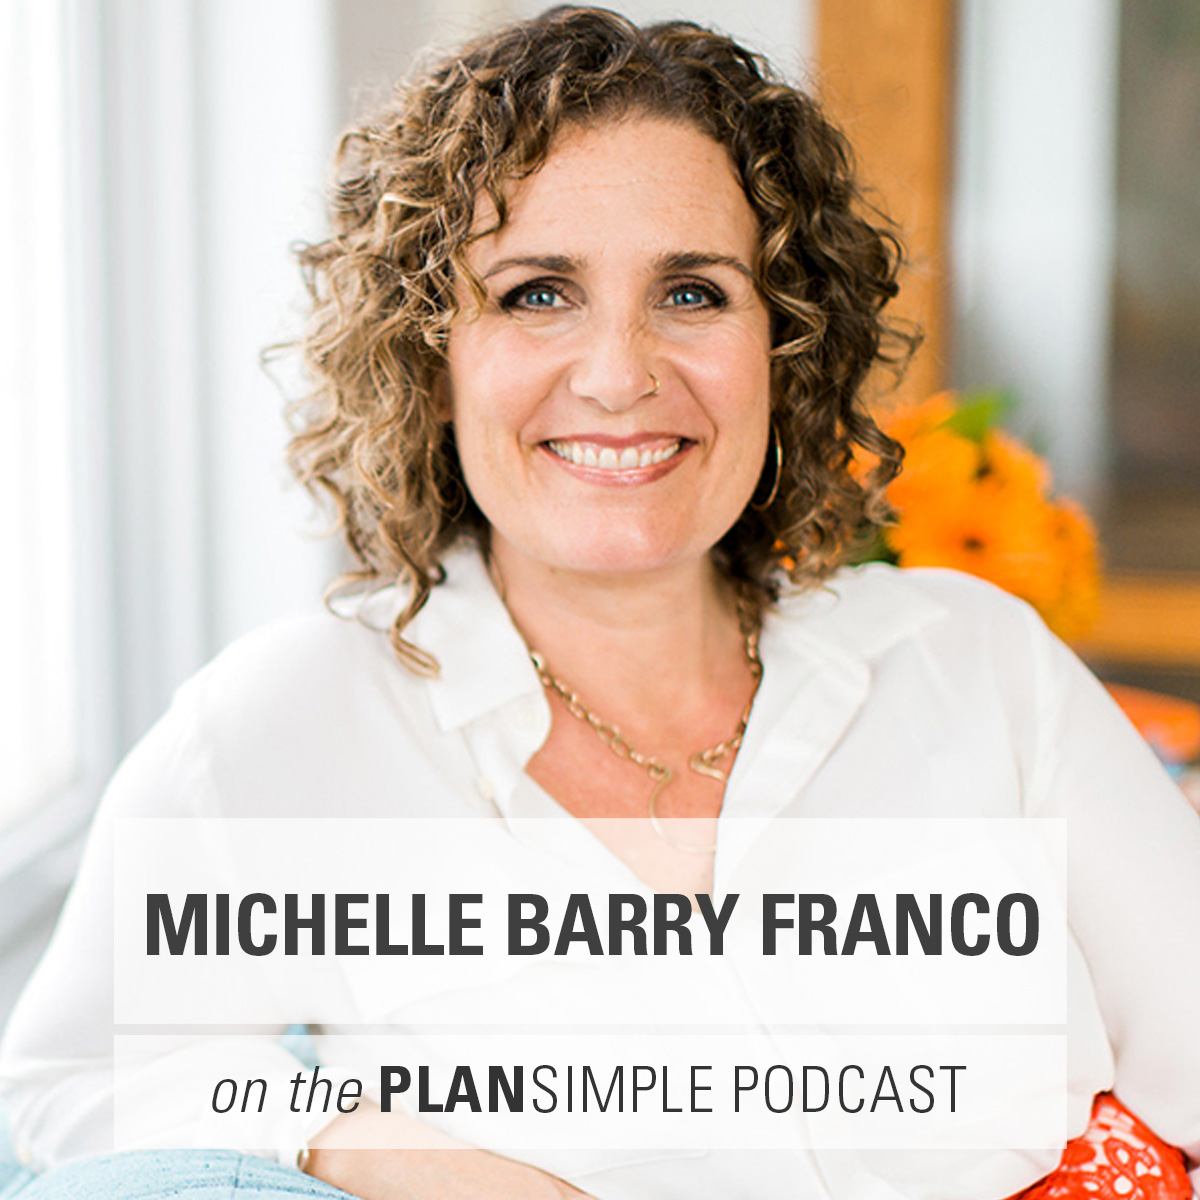 Communication With Michelle Barry Franco